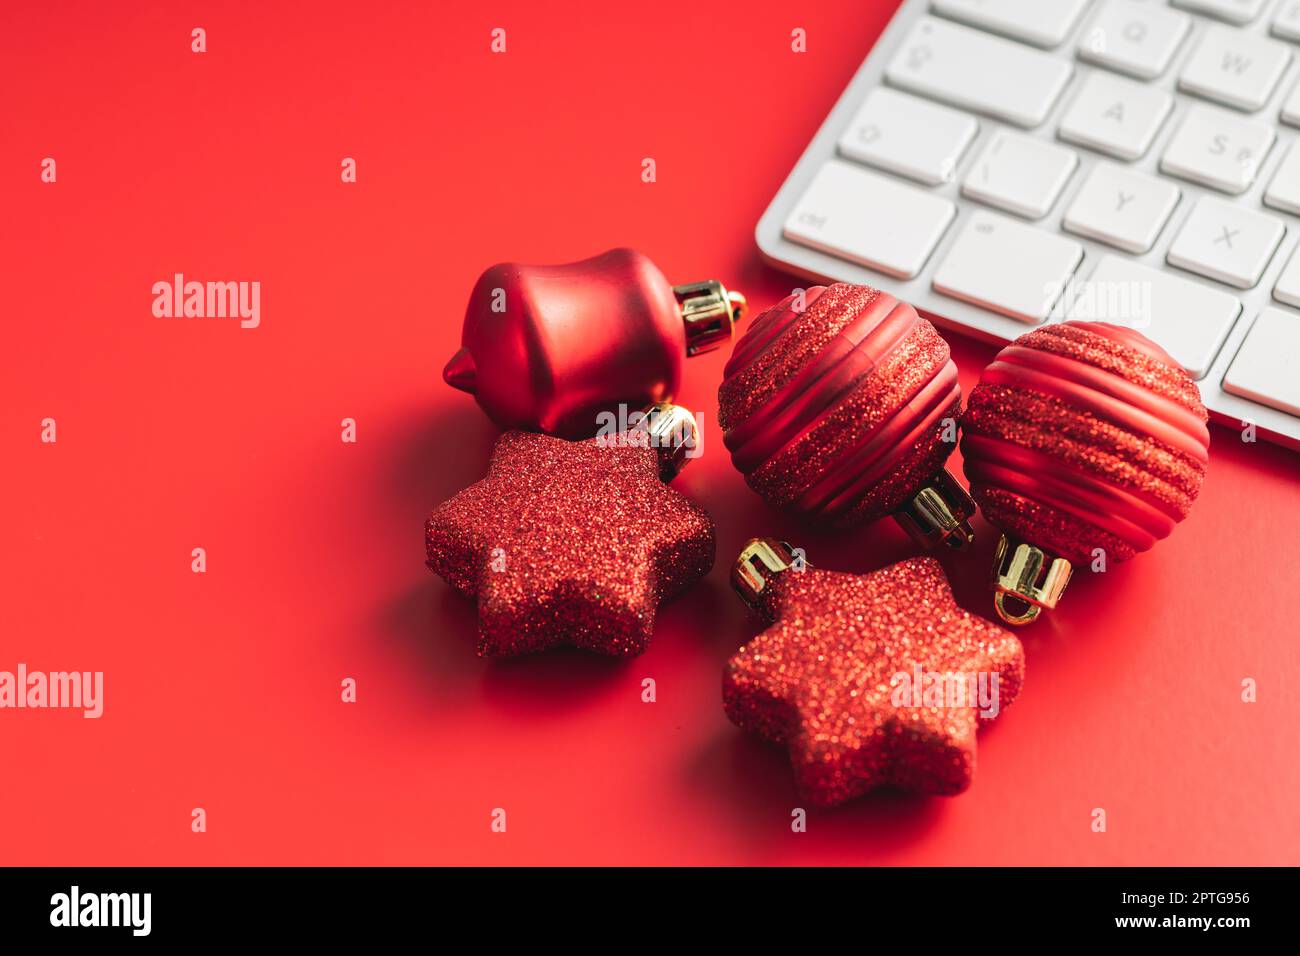 Red christmas decoration. Christmas bulbs and computer keyboard on the red background. Stock Photo